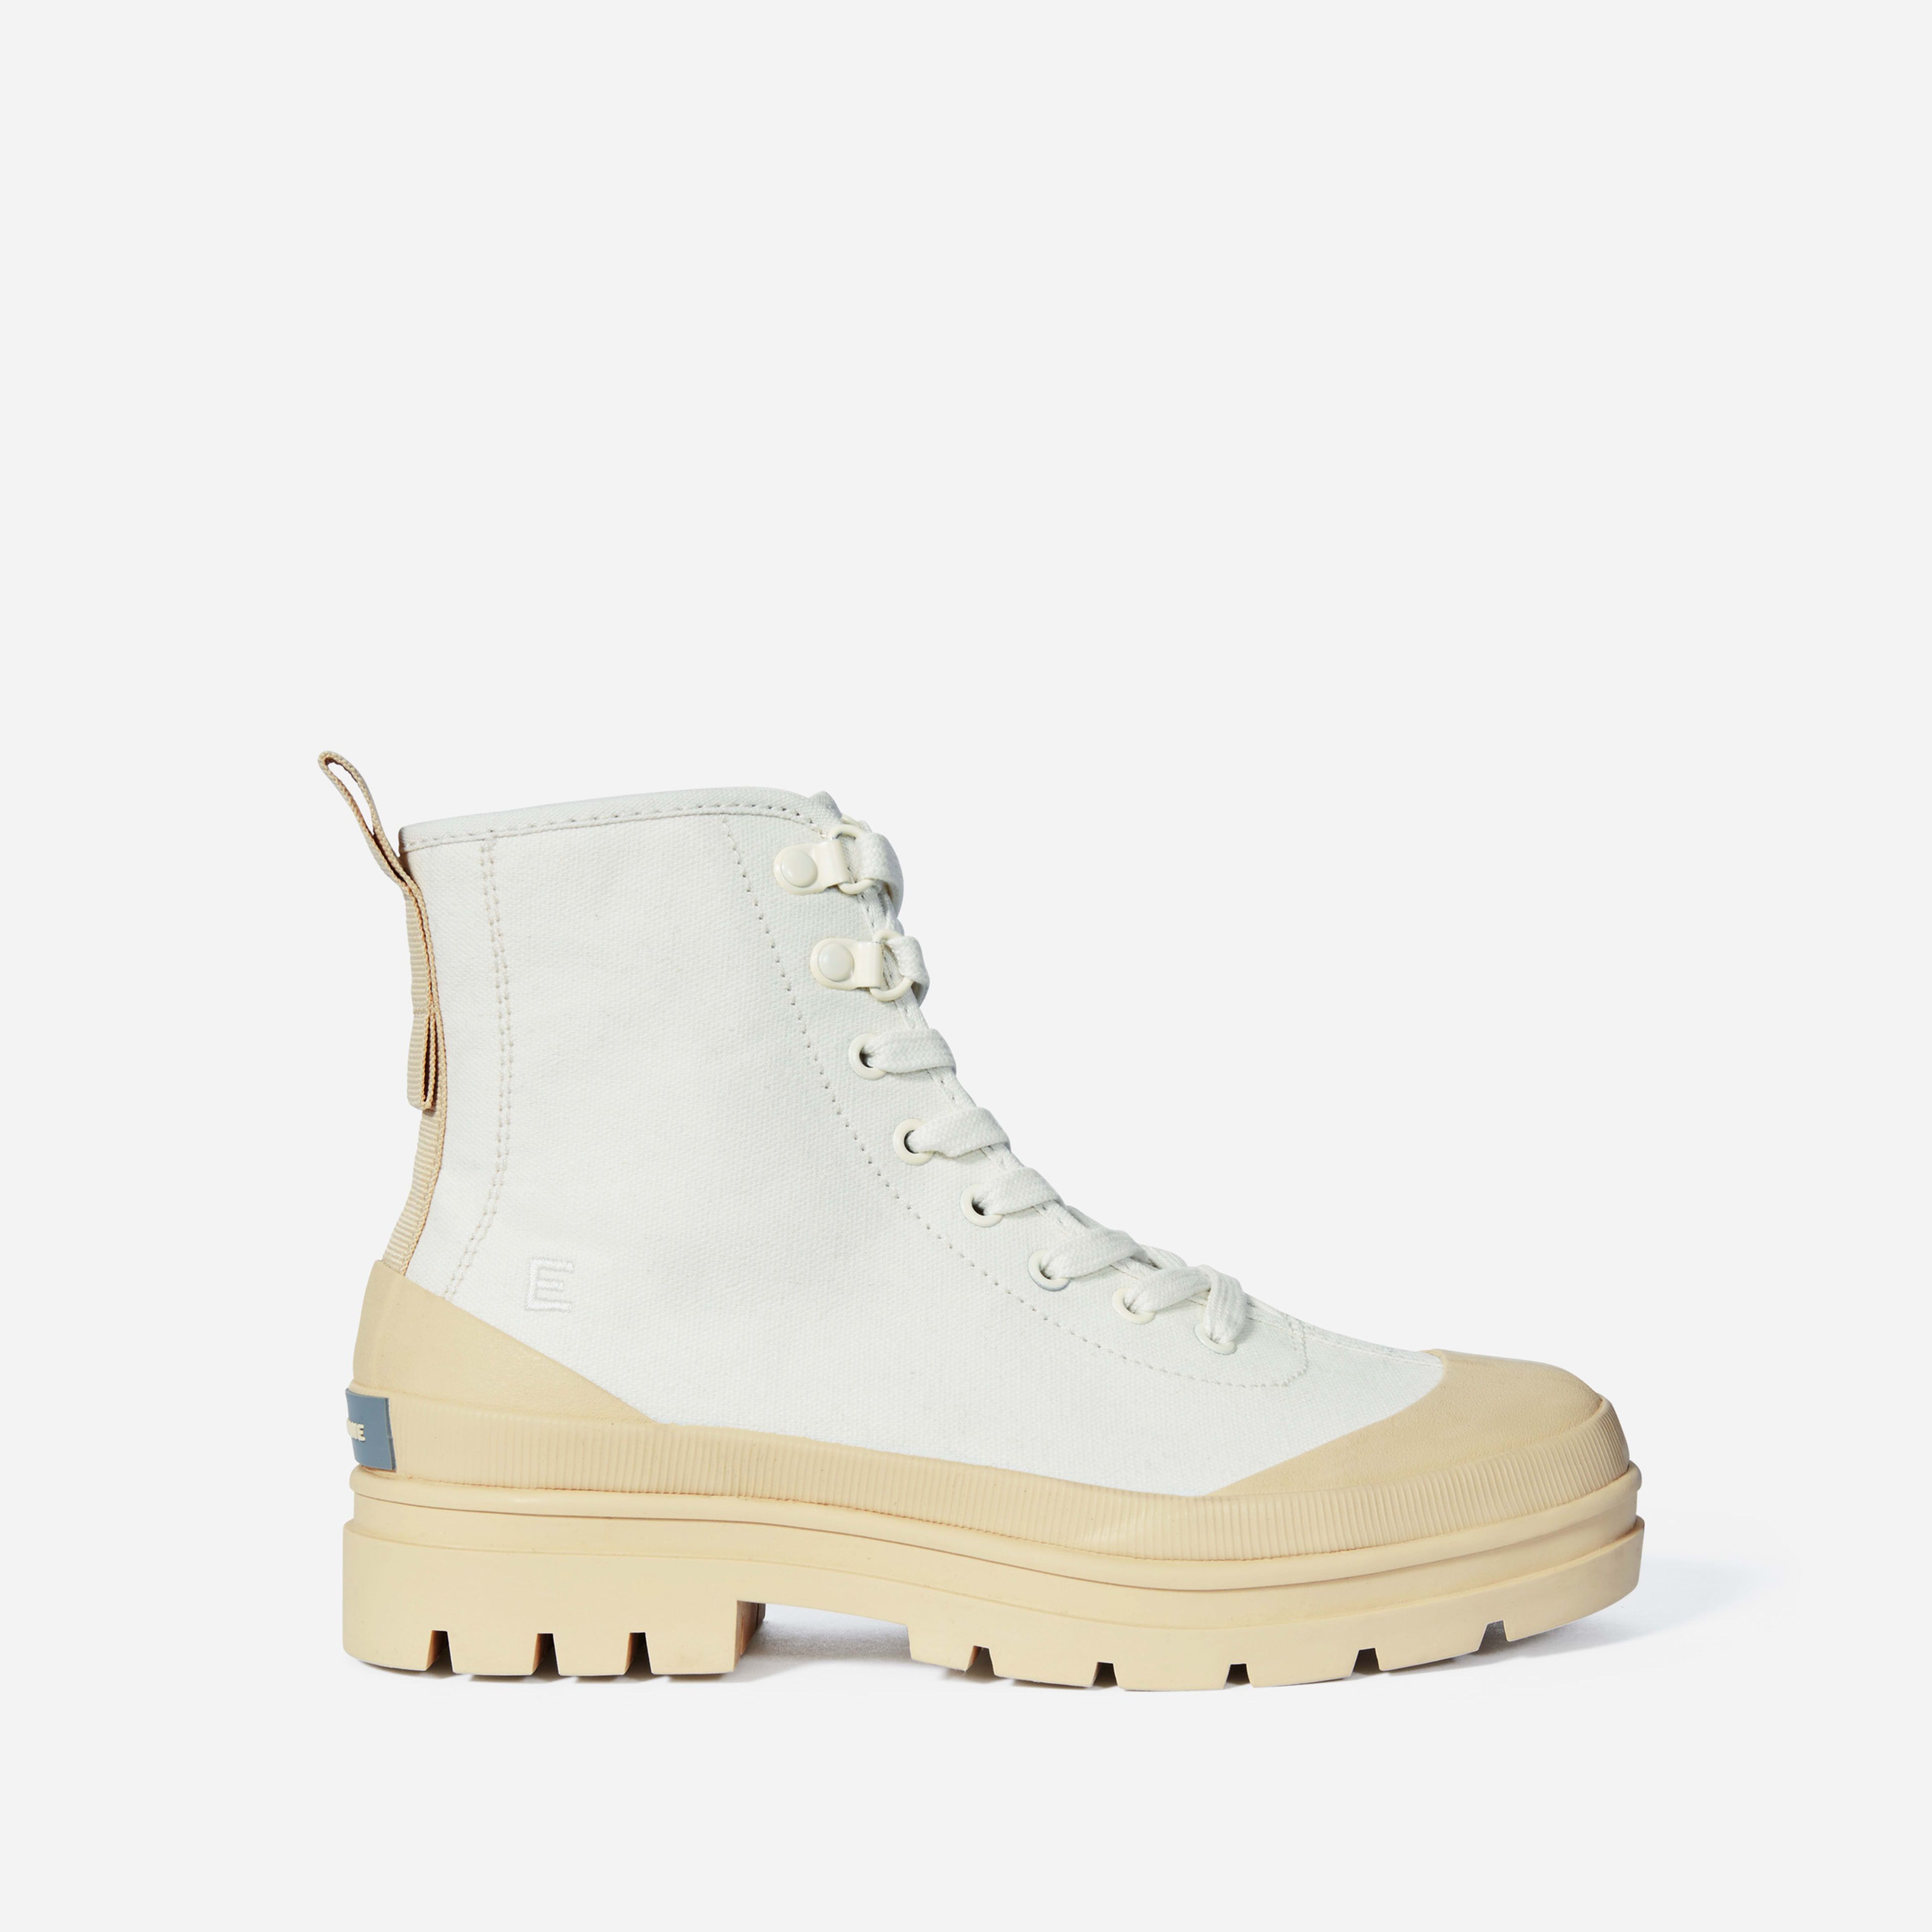 The Canvas Utility Boot | Everlane